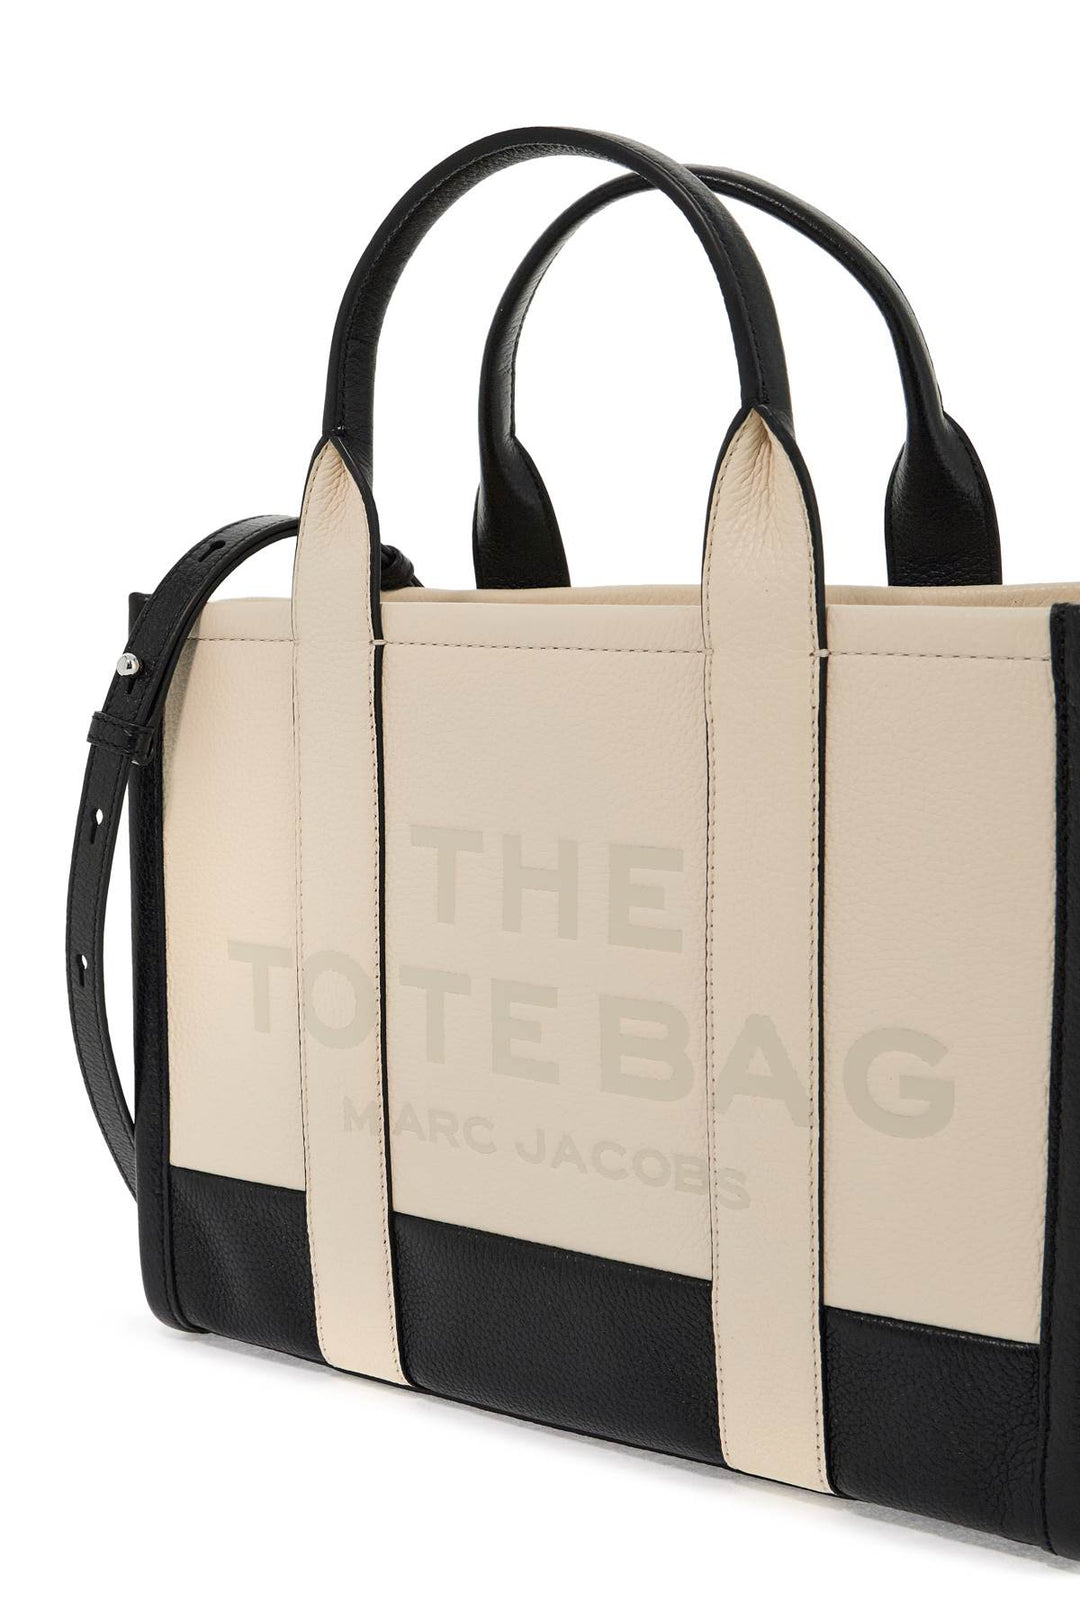 Marc Jacobs The Colorblock Medium Tote Bag   White